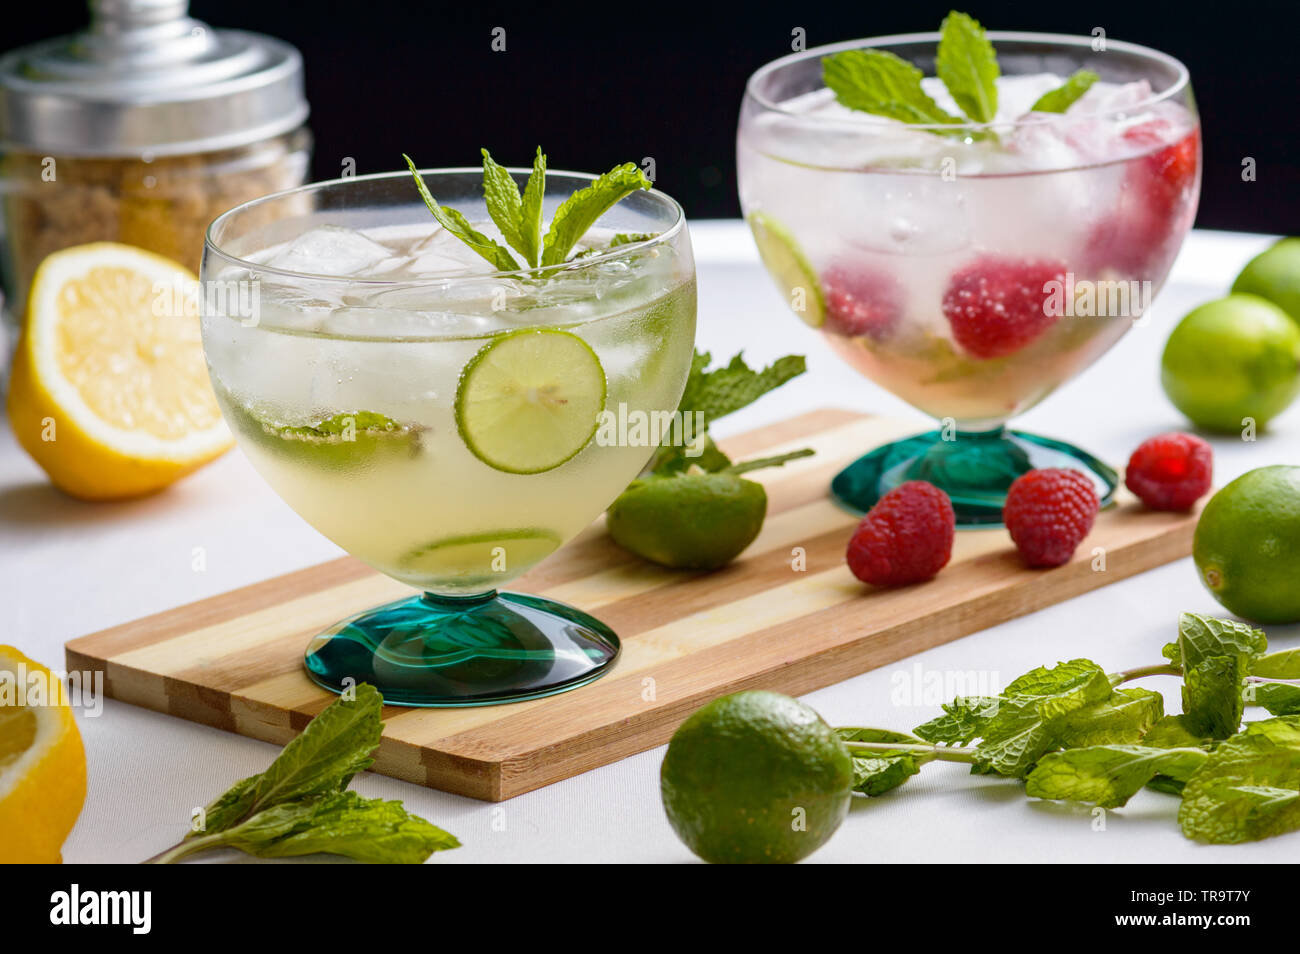 Mojito and raspberry mojito rum cocktail drinks with ingredients, limes, lemons, mint, brown sugar and raspberries. Concept for restaurants, food and Stock Photo